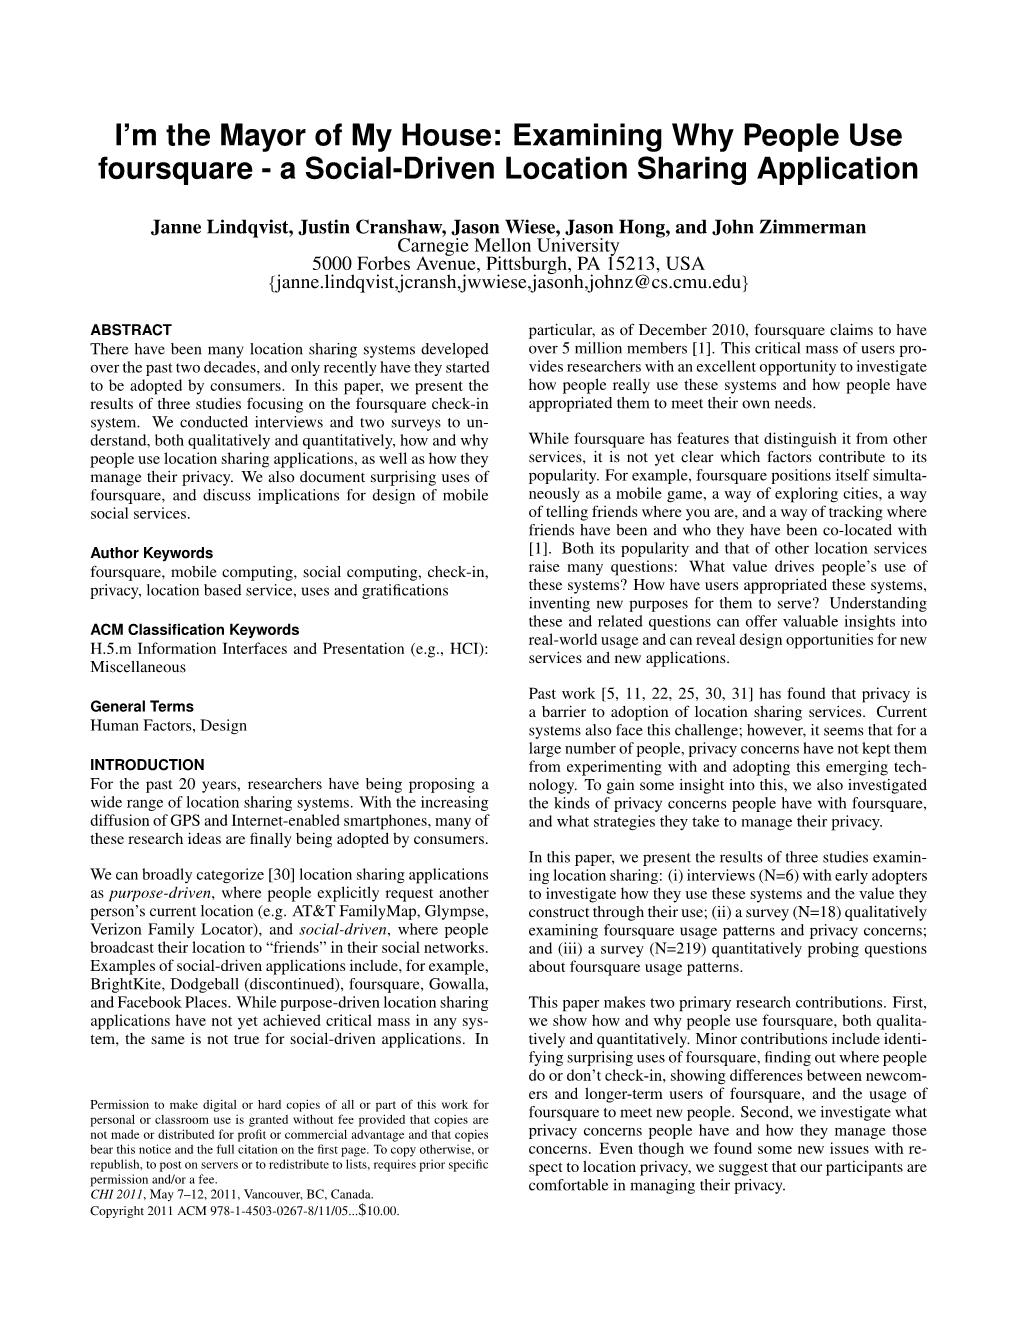 Examining Why People Use Foursquare - a Social-Driven Location Sharing Application